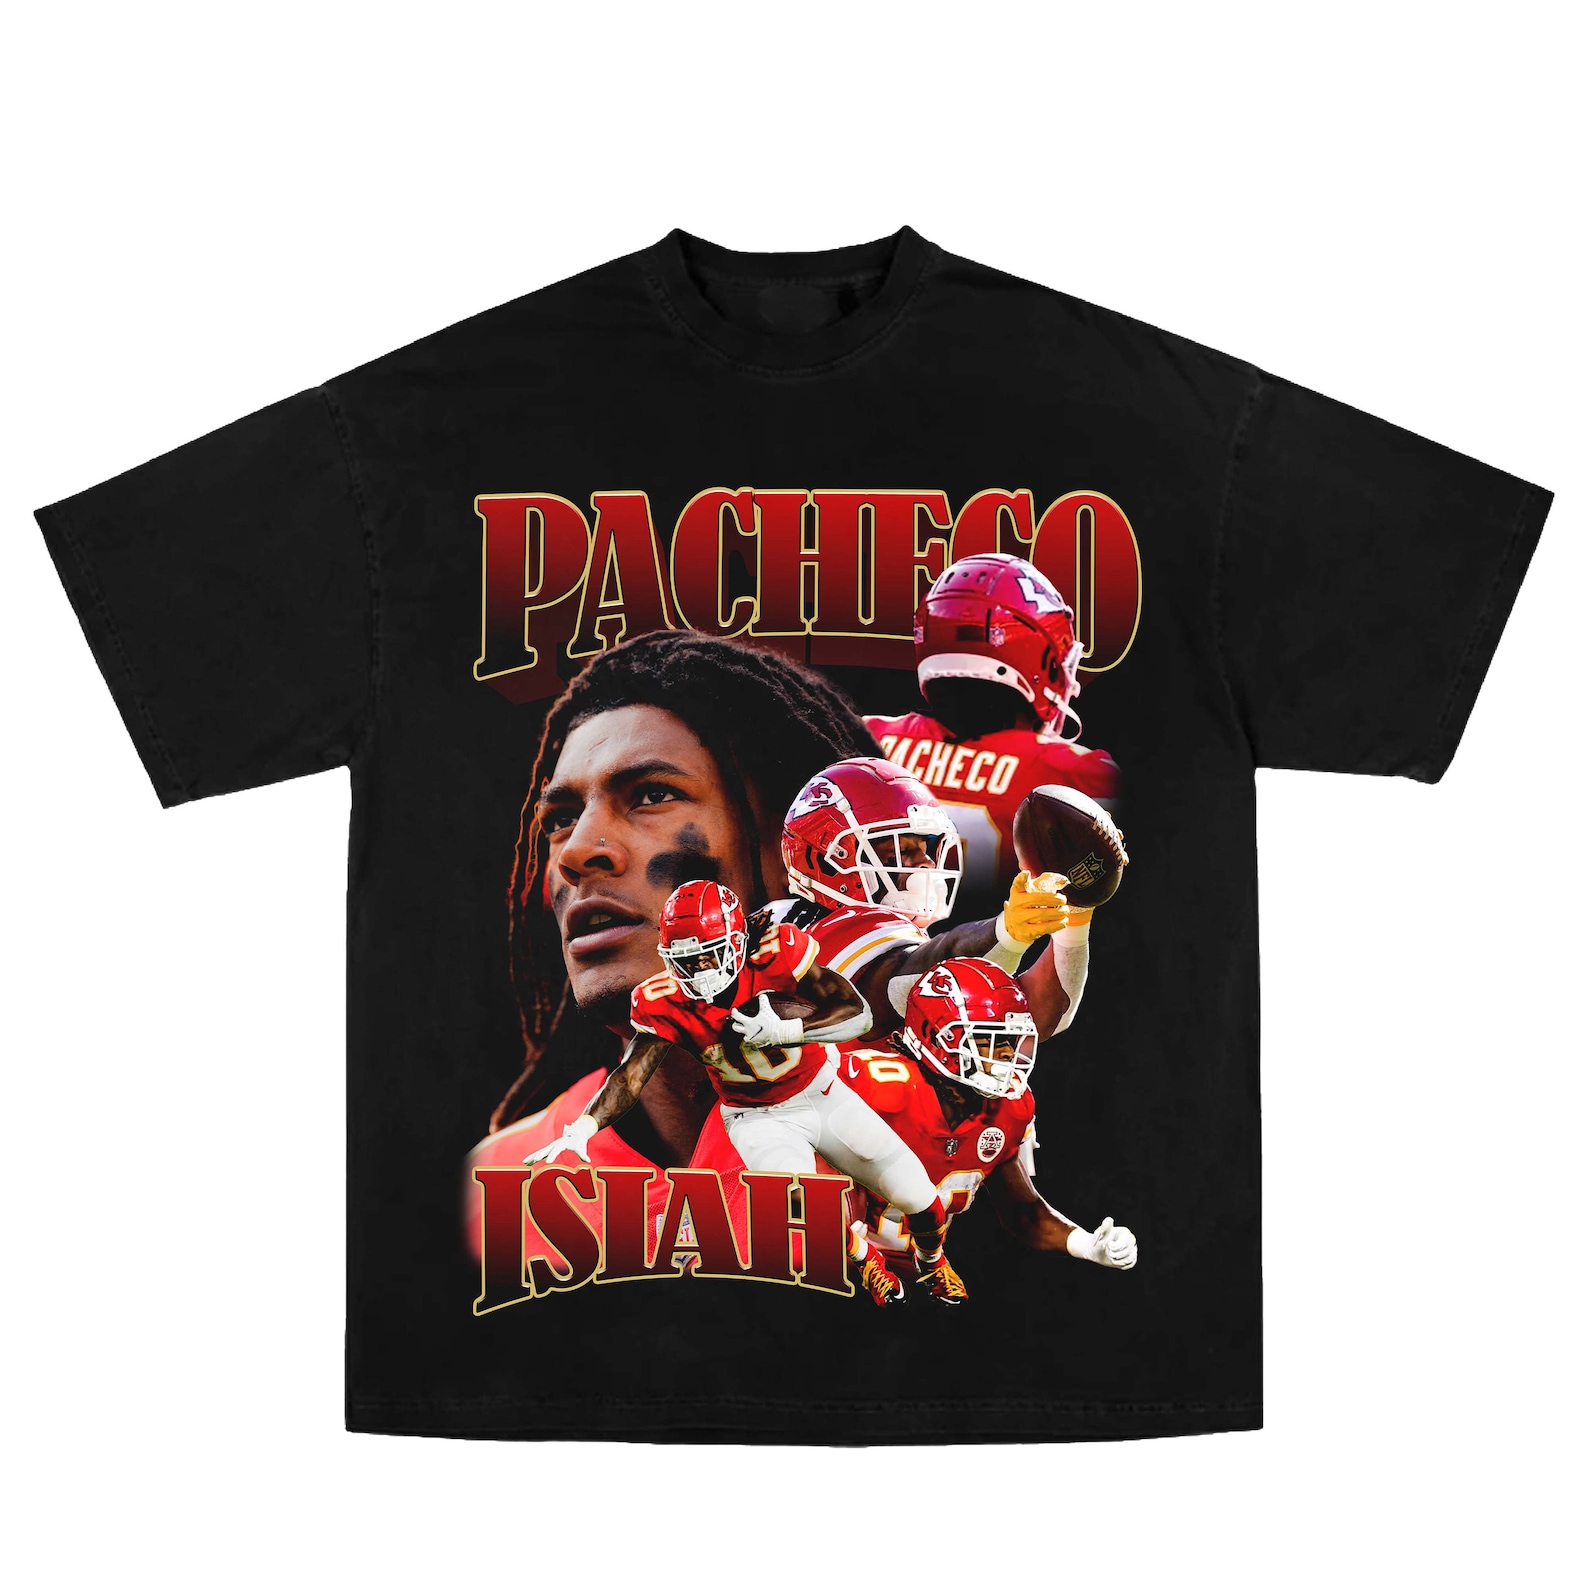 Isiah Pacheco T Shirt Design PNG Instant Download - Etsy